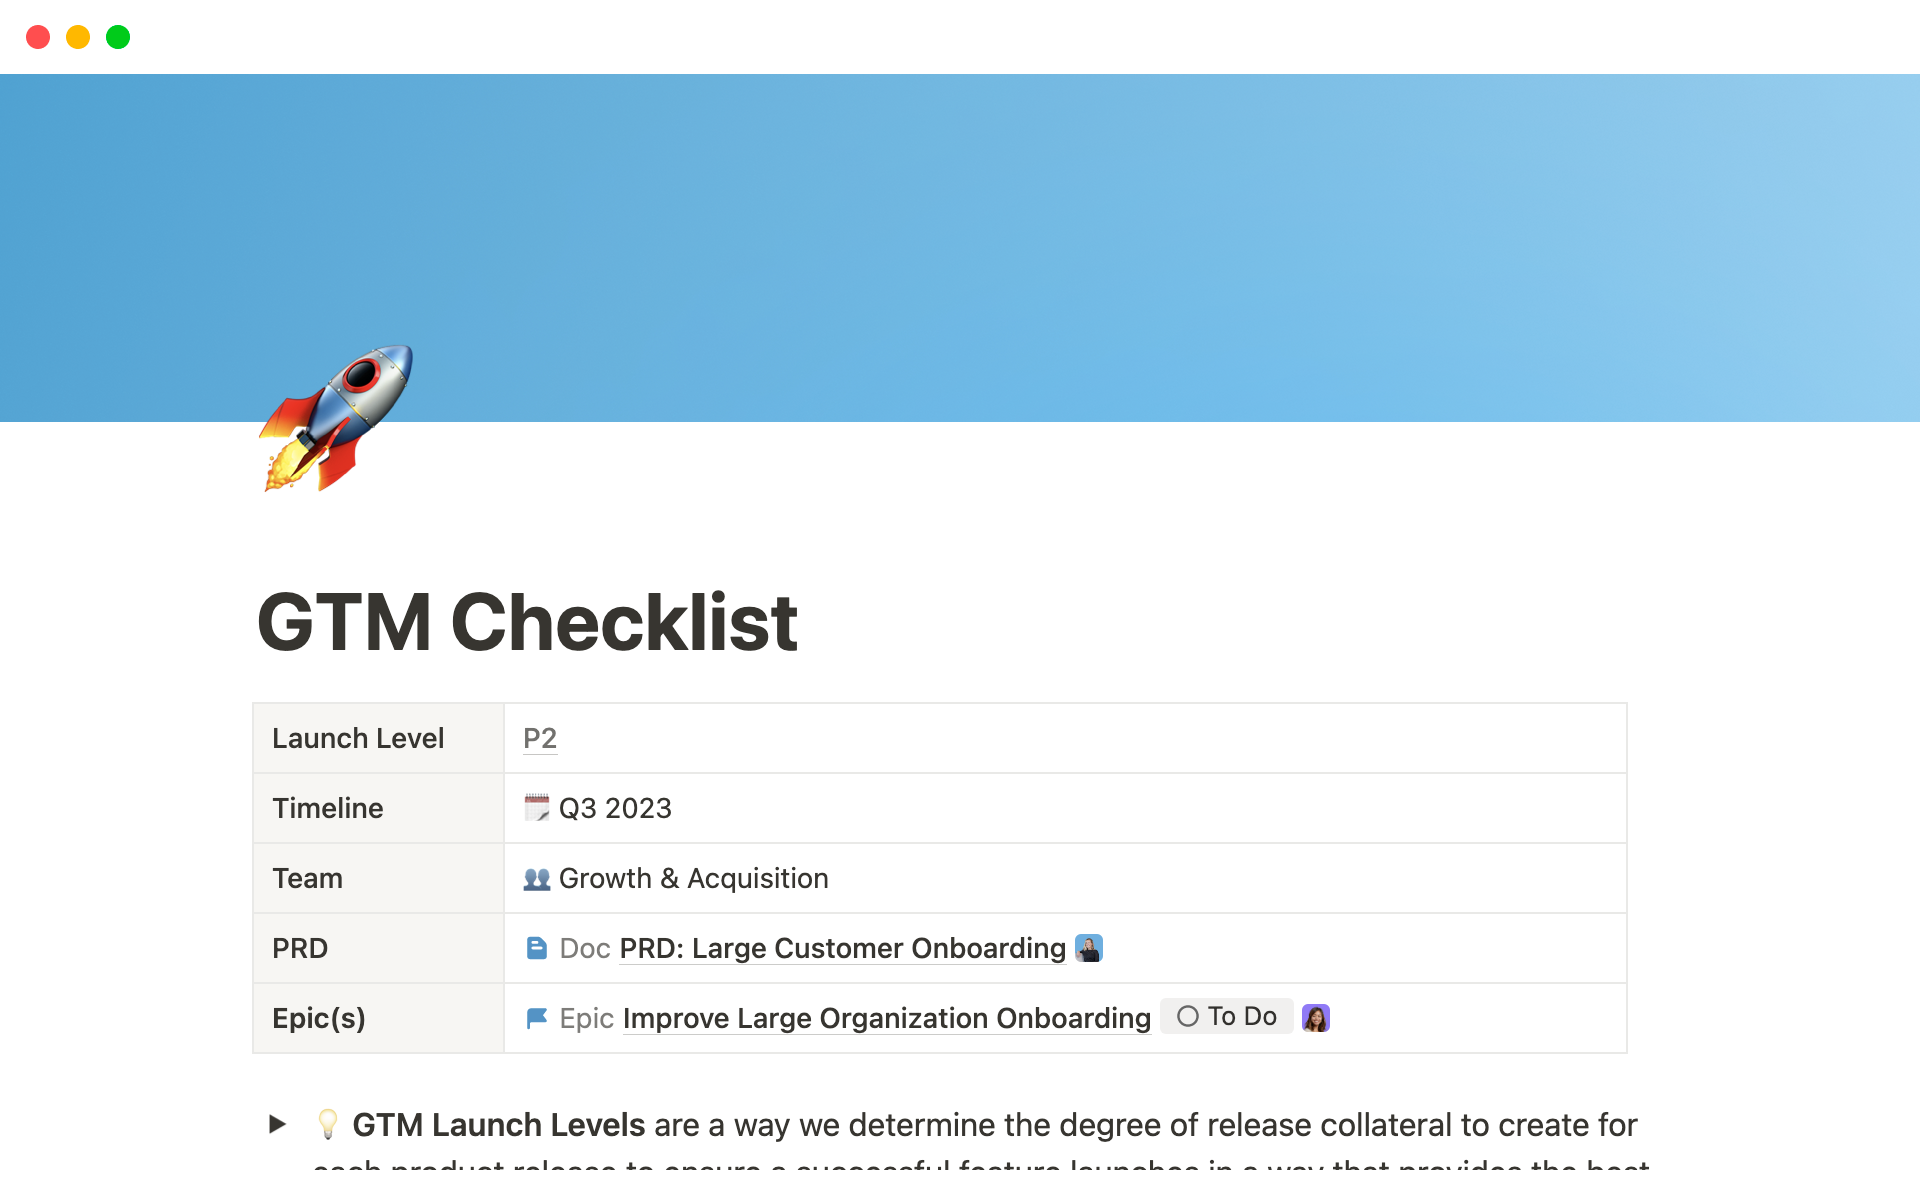 GTM Launch Checklist template creates a space to keep your Product Development and Go-To-Market teams connected across their preferred tools